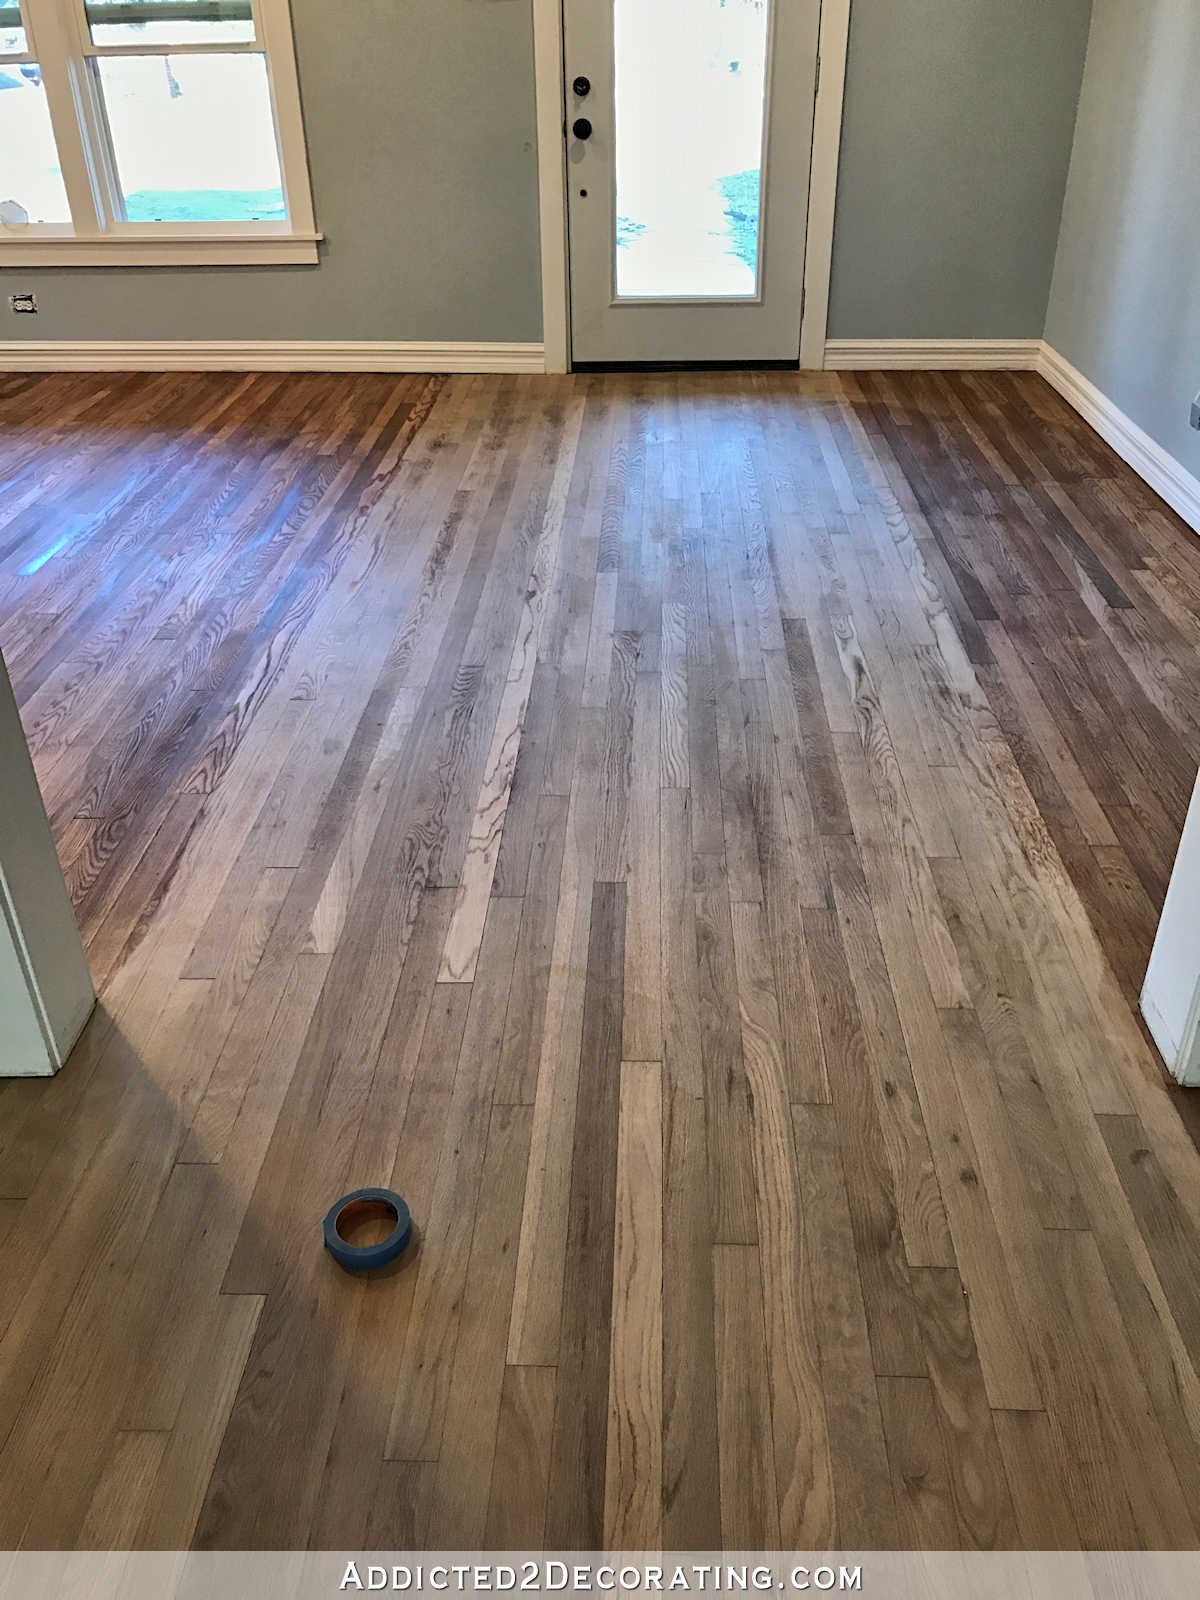 18 Famous How Do You Refinish Hardwood Floors Yourself 2024 free download how do you refinish hardwood floors yourself of adventures in staining my red oak hardwood floors products process regarding staining red oak hardwood floors 4 entryway and living room wood 